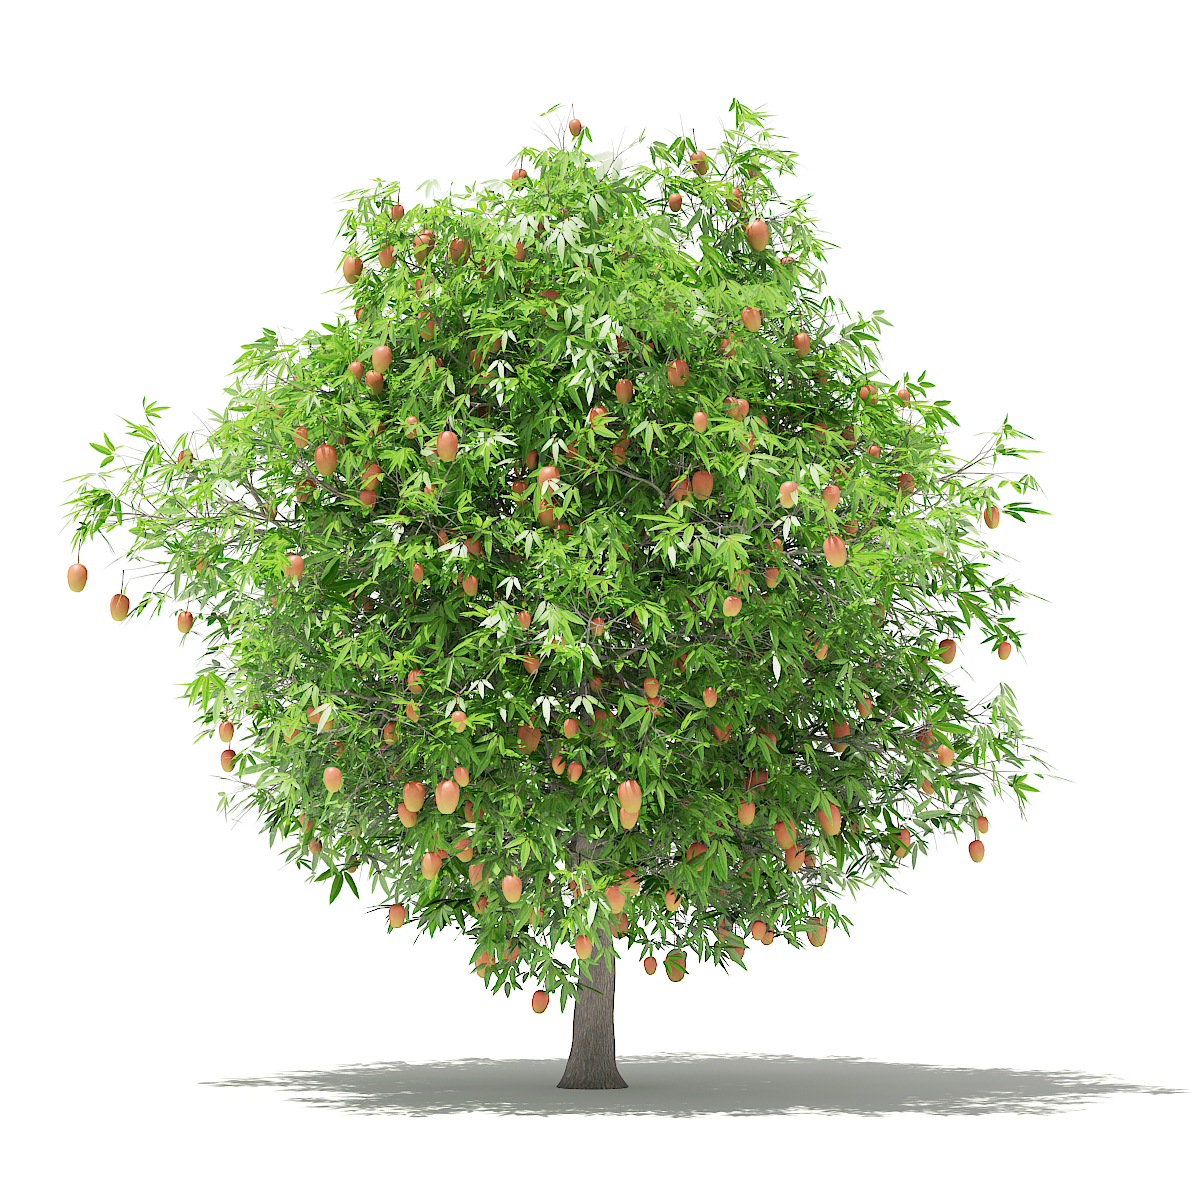 Mango Tree With Fruits 3d Model 4m By Cgaxis 3docean